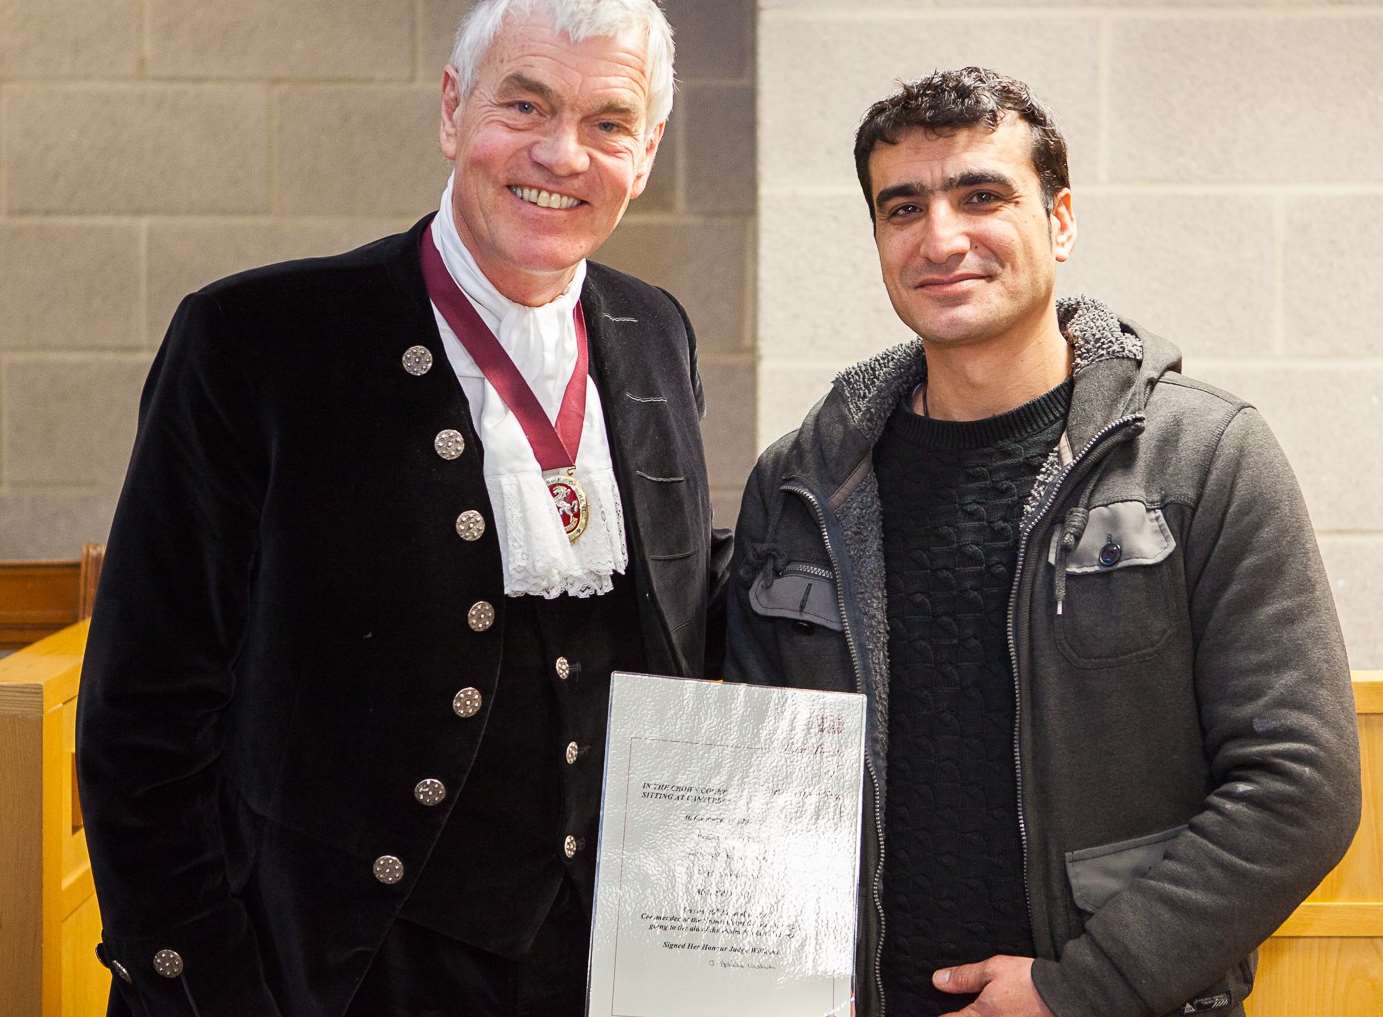 Ali Samivand receiving the award from the High Sheriff